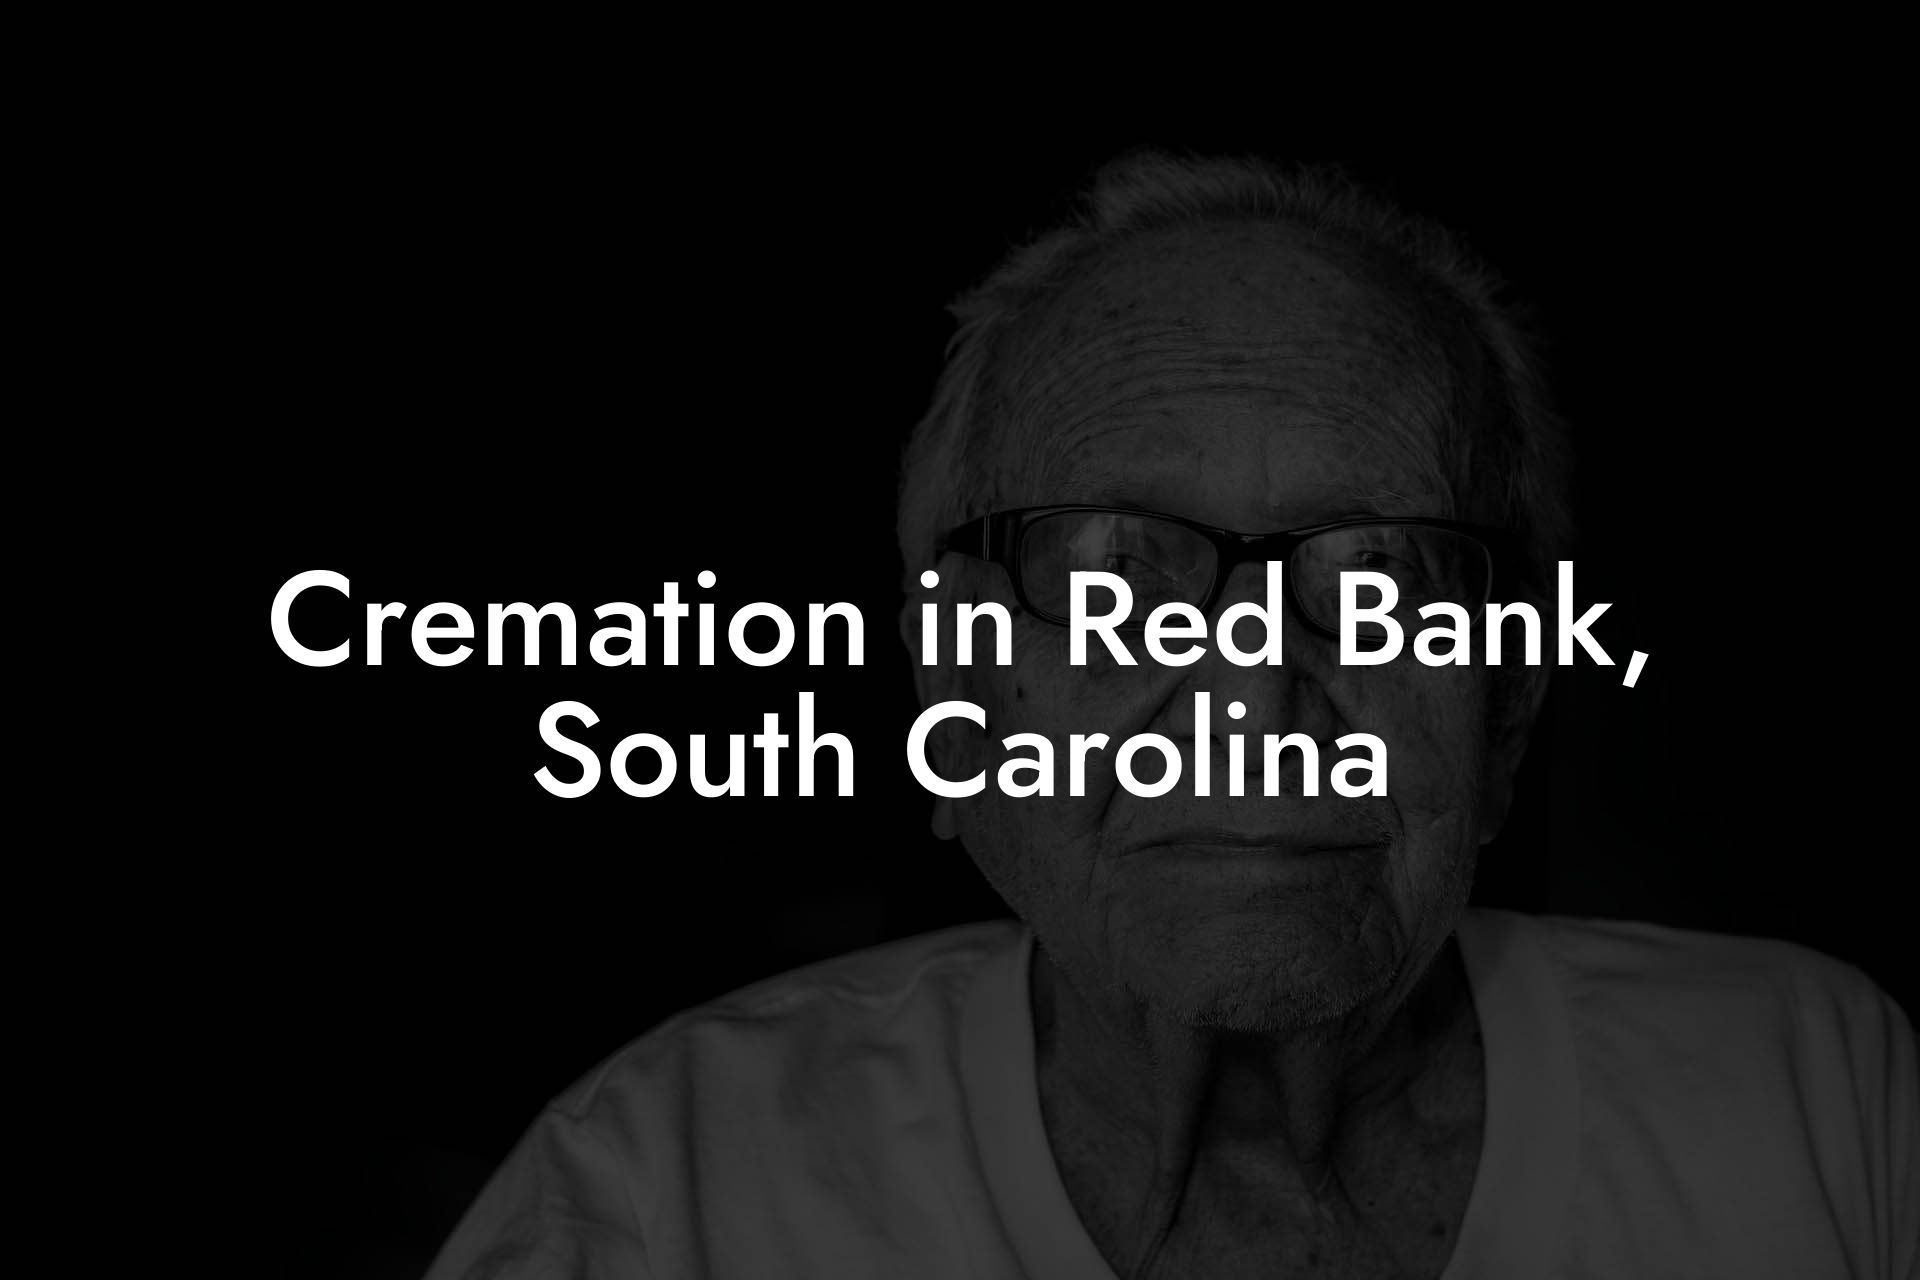 Cremation in Red Bank, South Carolina